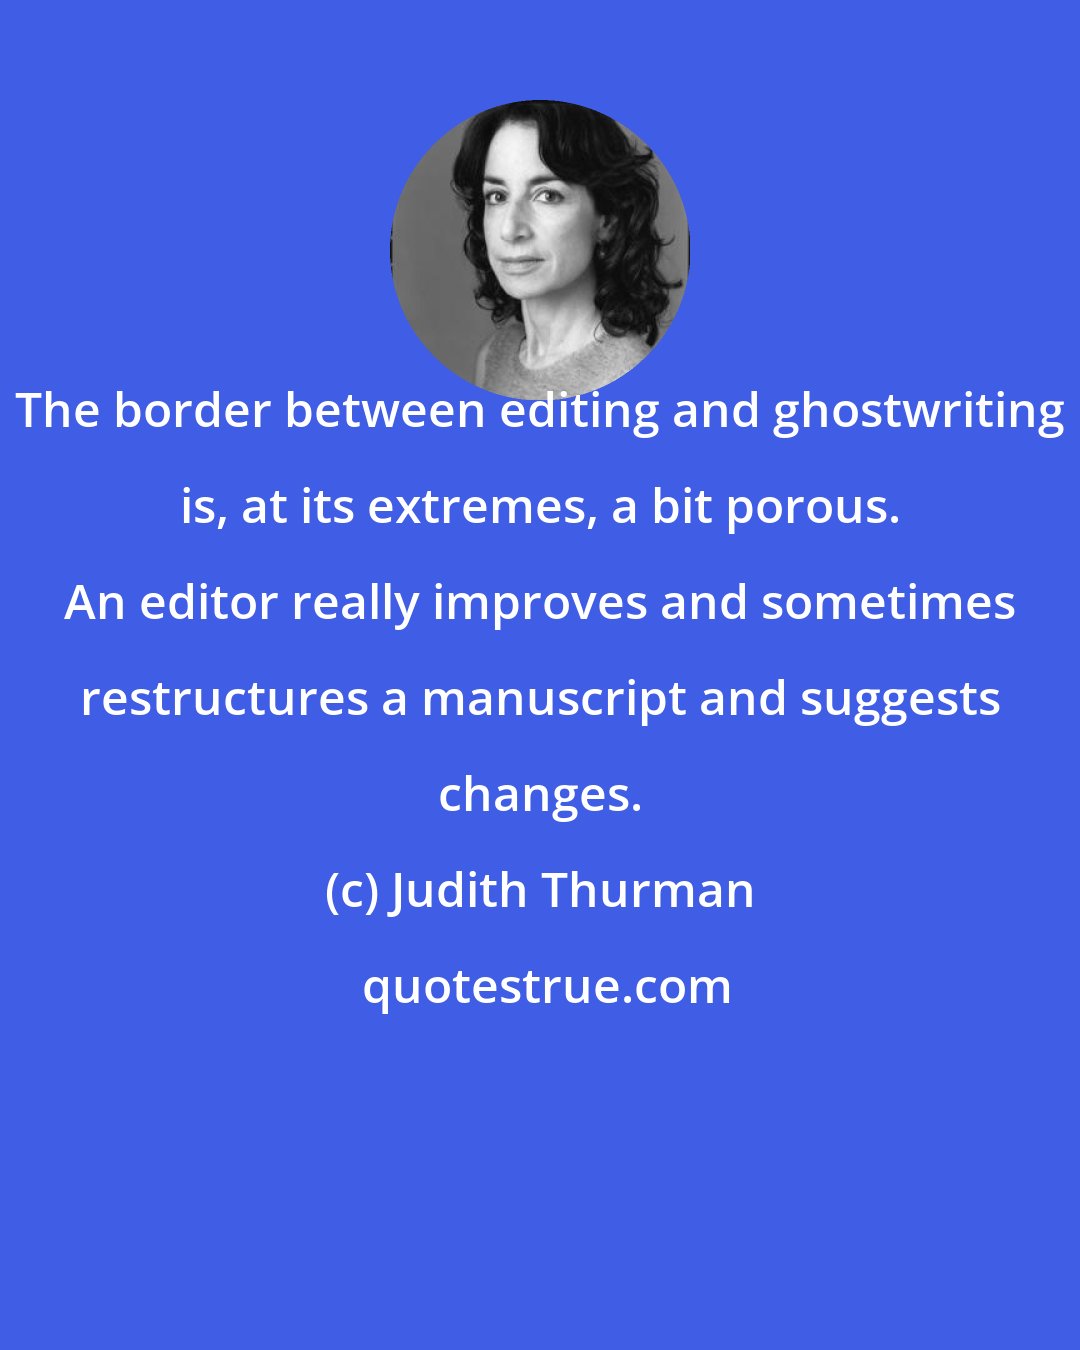 Judith Thurman: The border between editing and ghostwriting is, at its extremes, a bit porous. An editor really improves and sometimes restructures a manuscript and suggests changes.